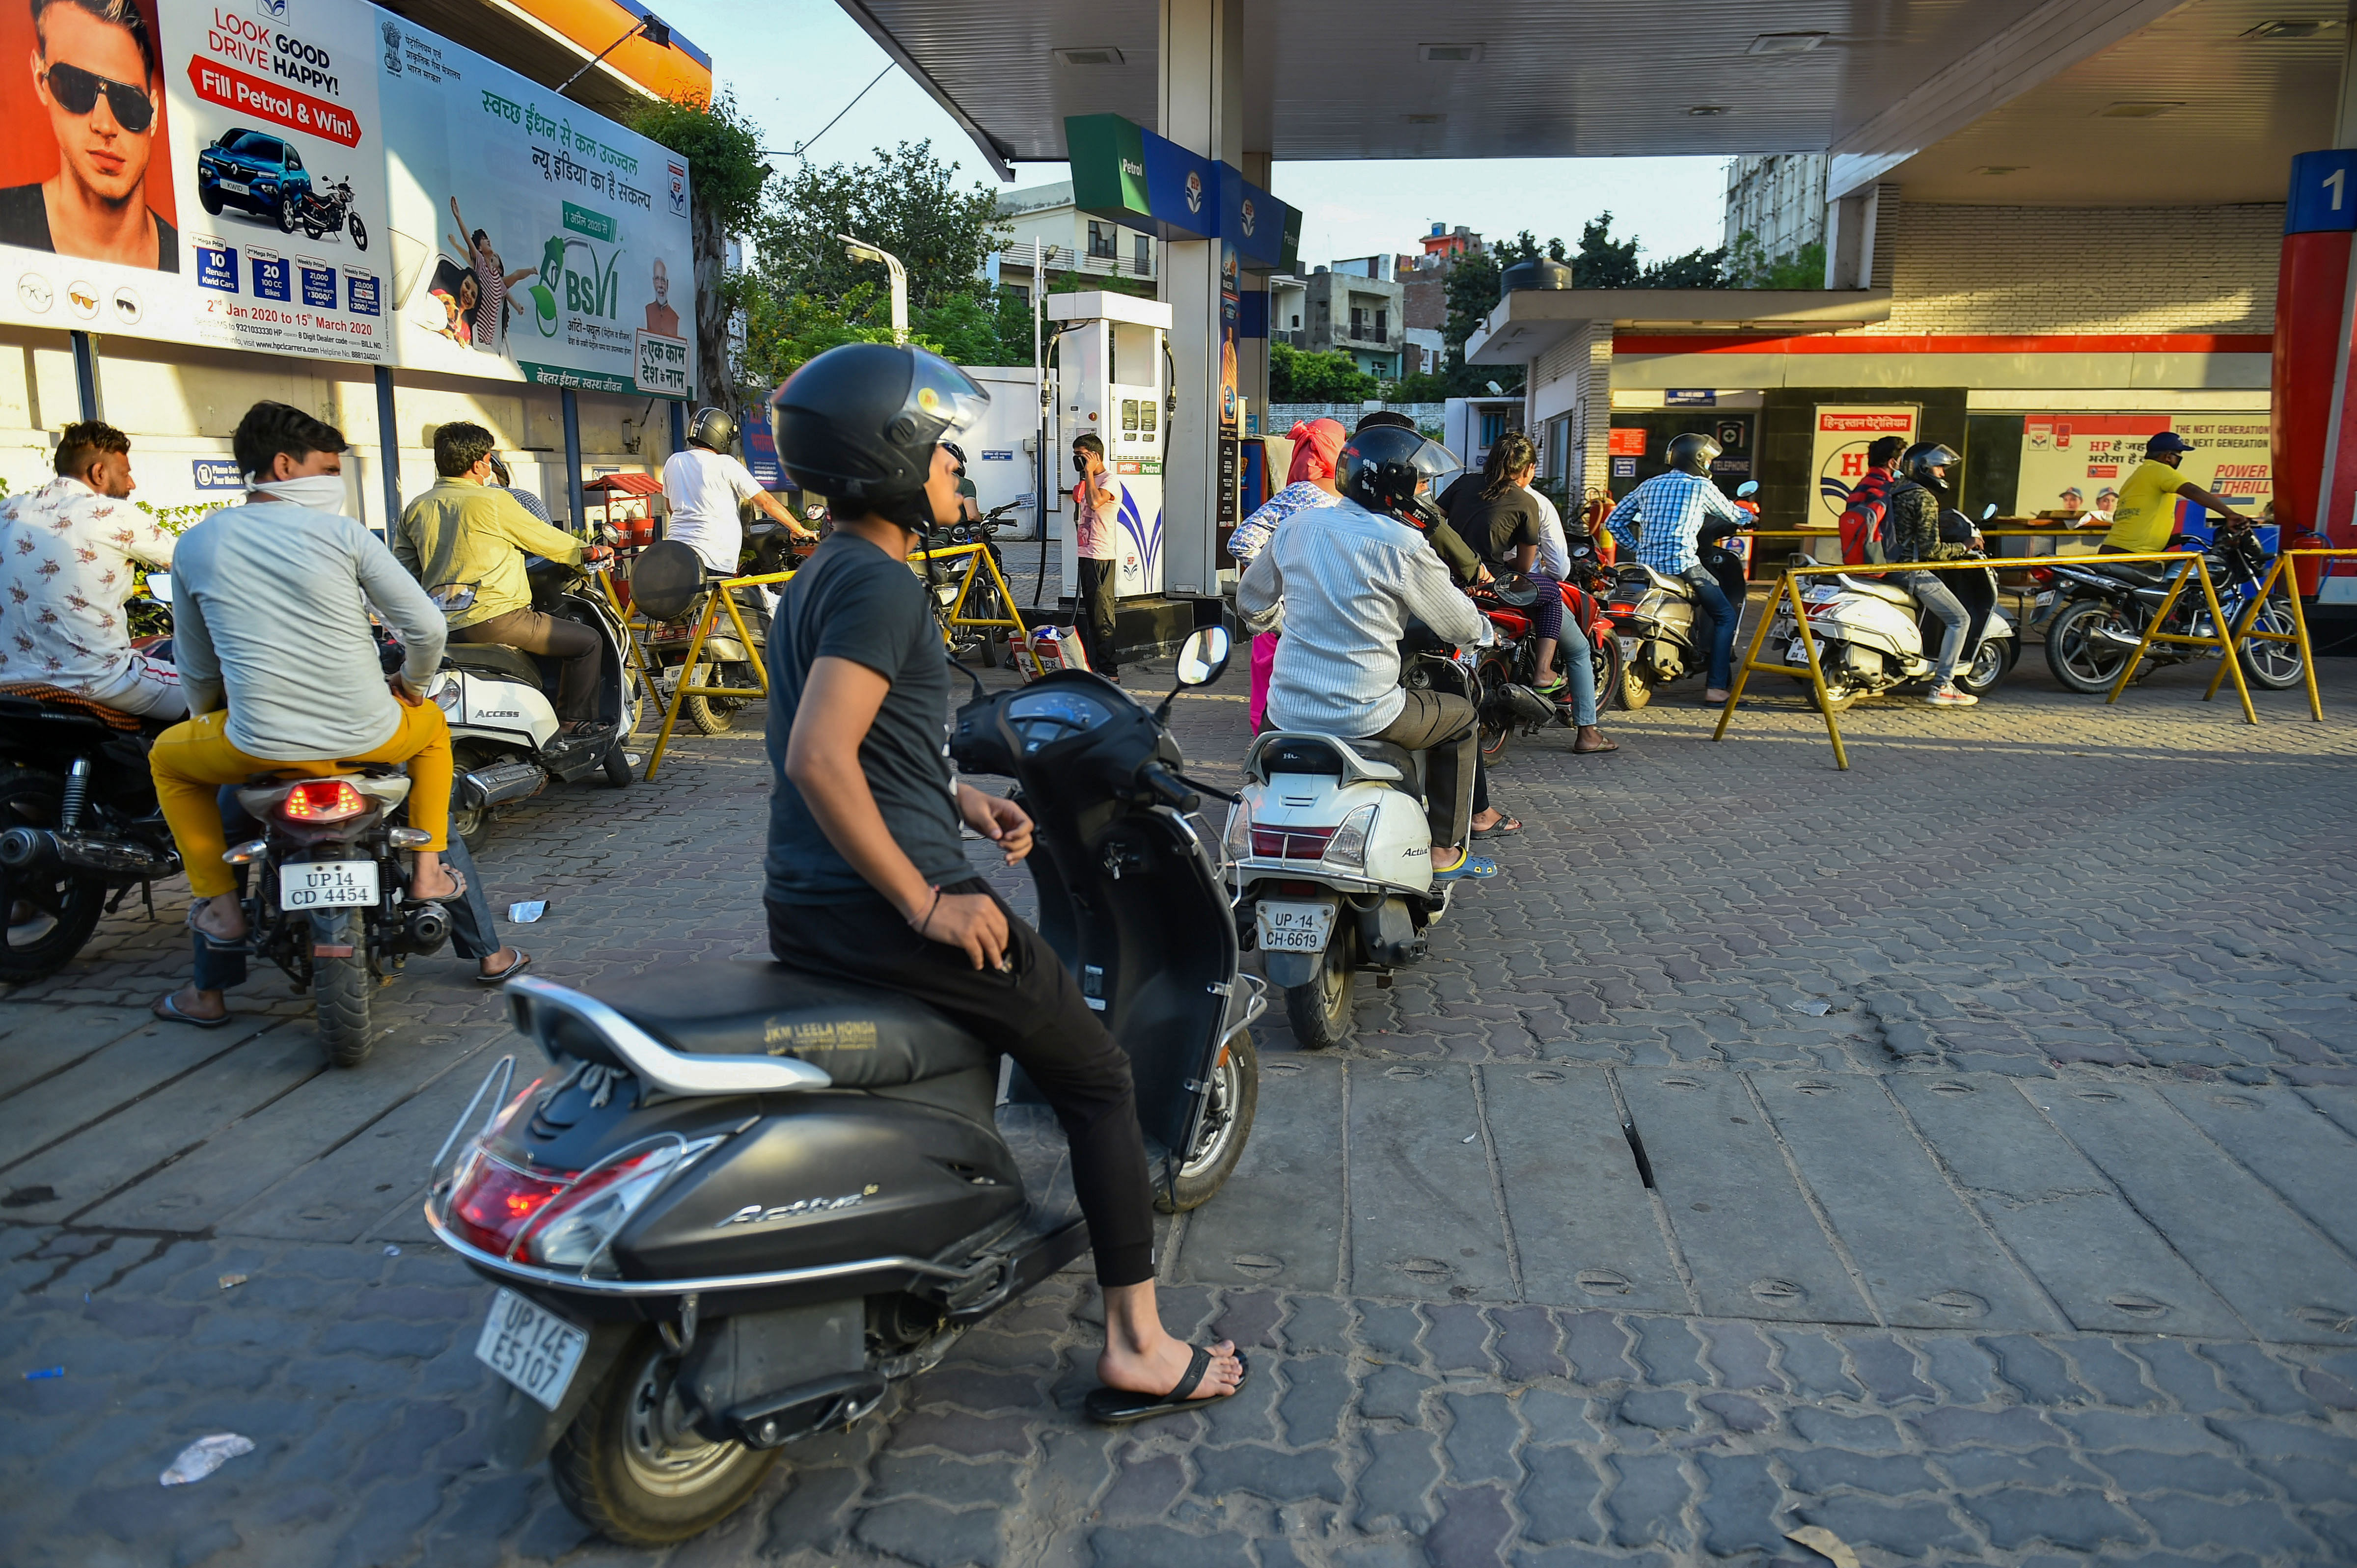 Long queue of vehicles is seen at a fuel station, after the Uttar Pradesh government ordered a complete shutdown of COVID-19 hotpots in 15 districts till April 15. (PTI Photo)